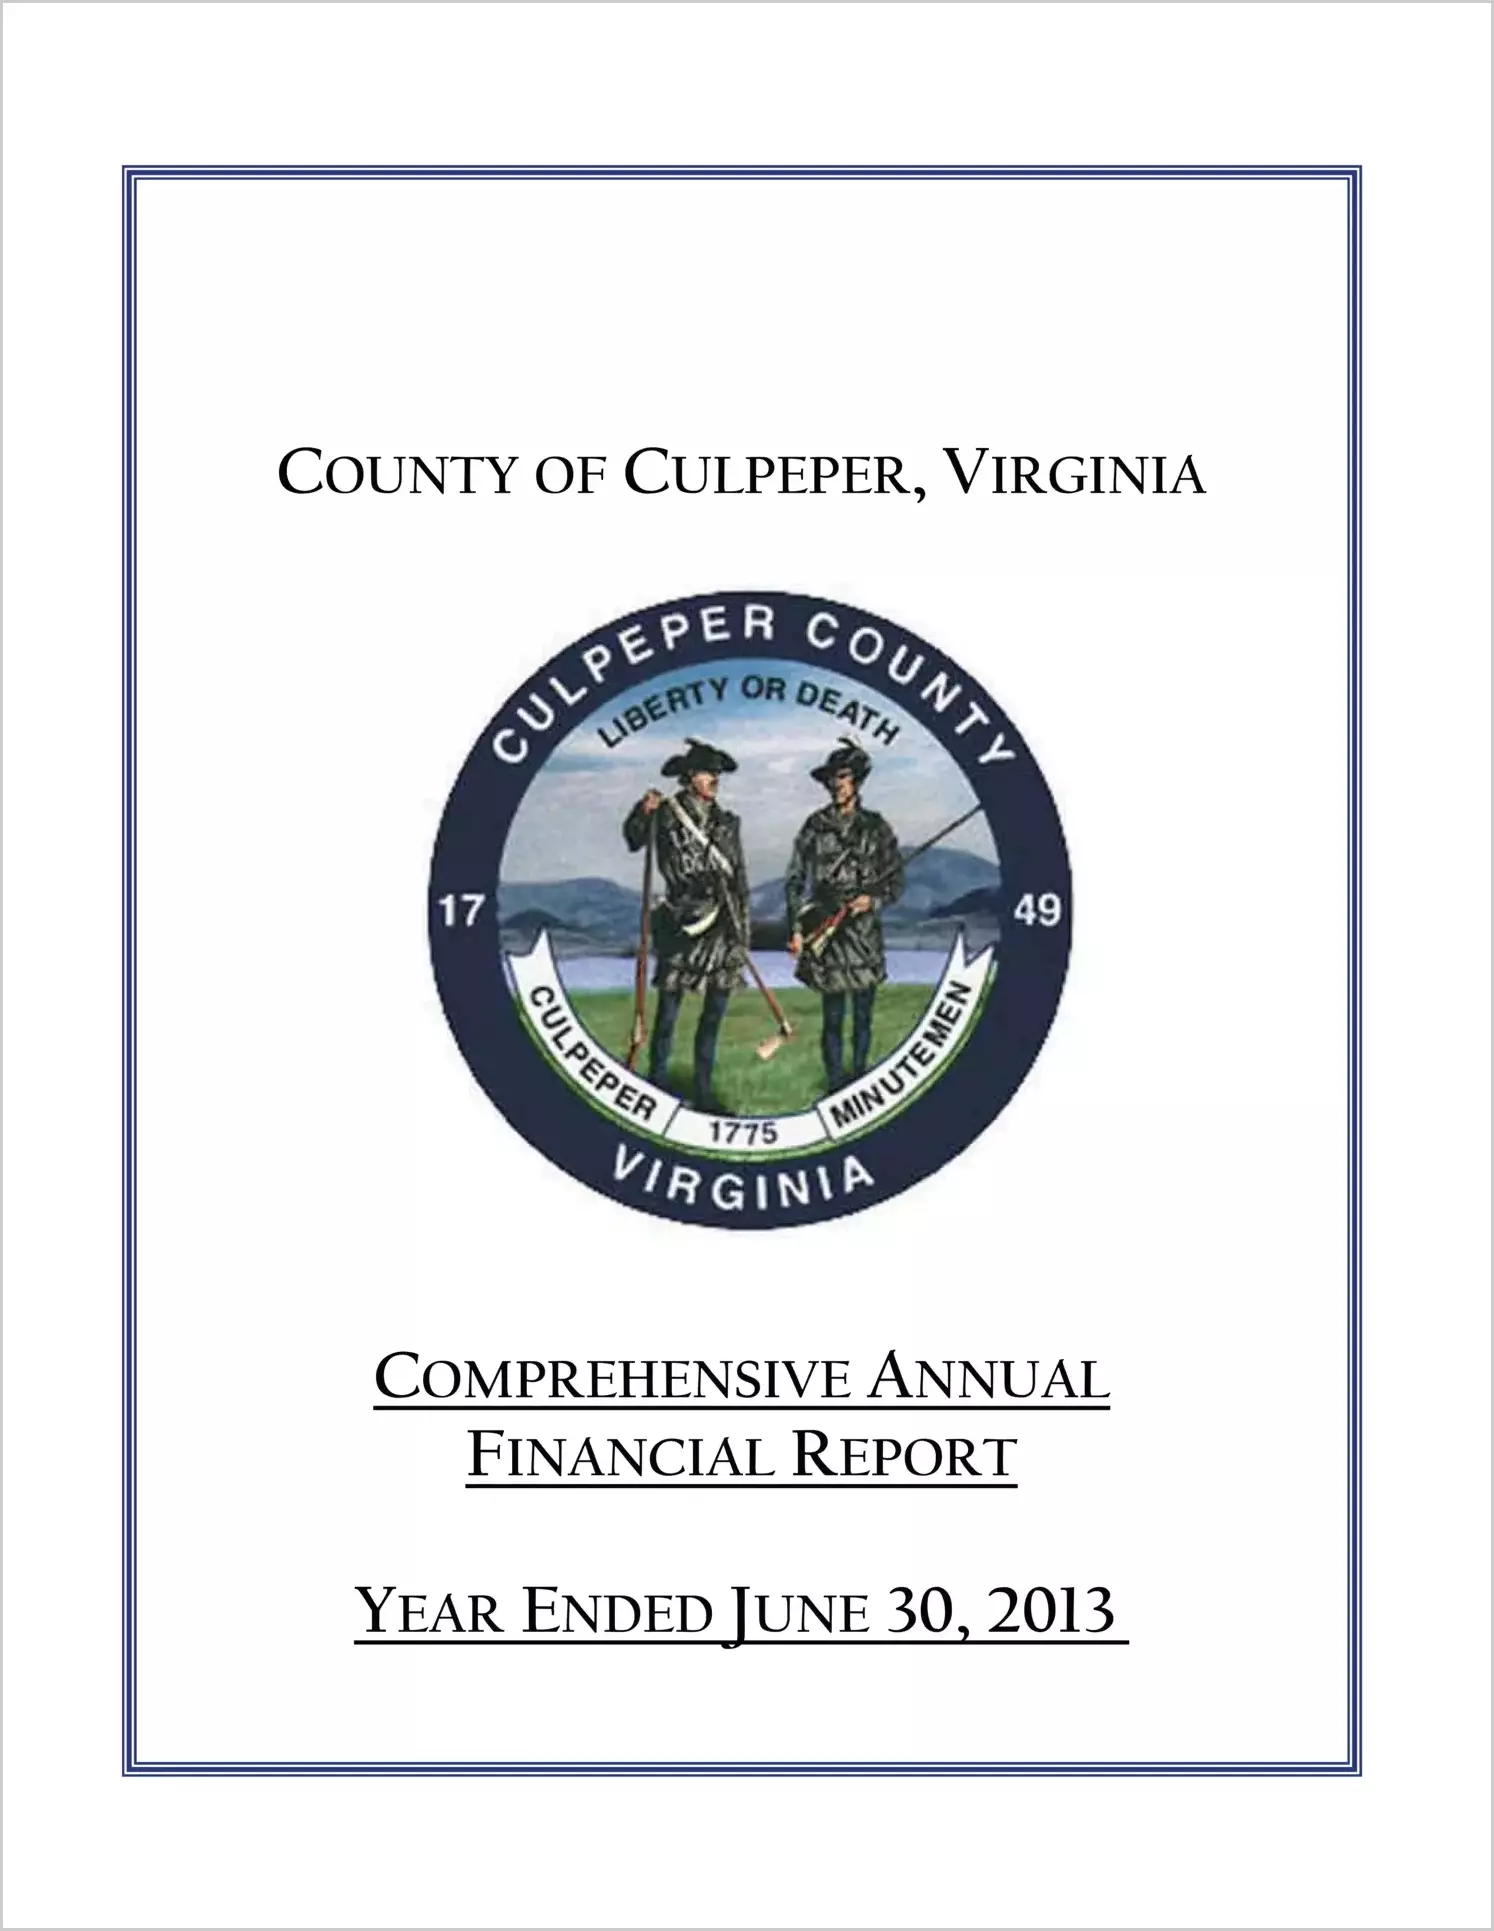 2013 Annual Financial Report for County of Culpeper